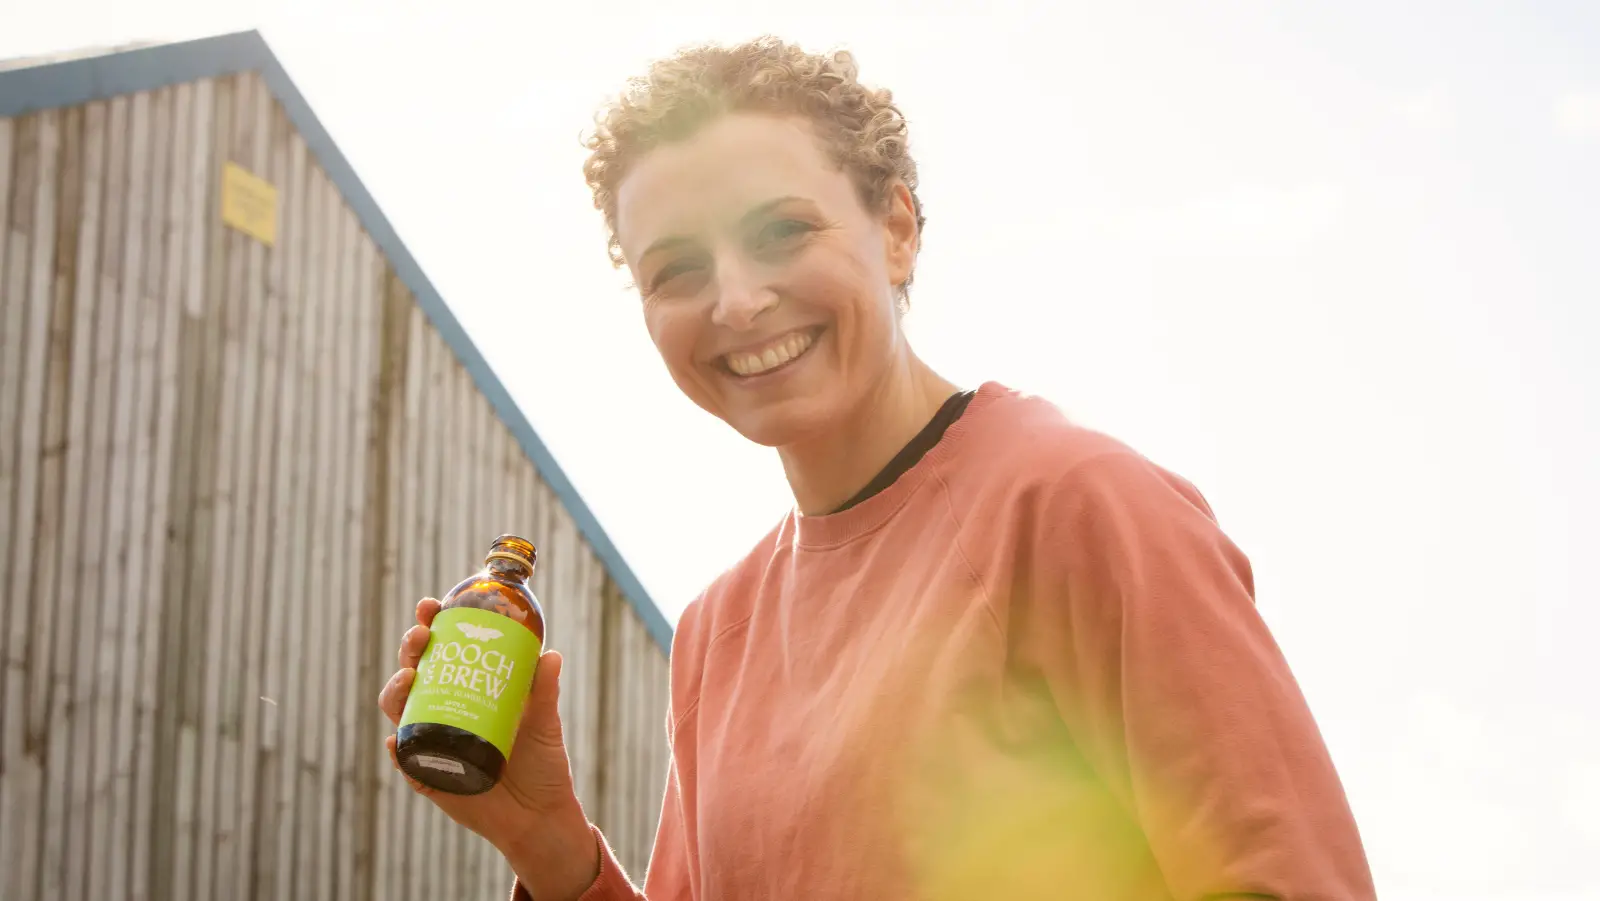 Altrincham company behind ‘healthy tea’ drink smashes crowdfunding target in 24 hours